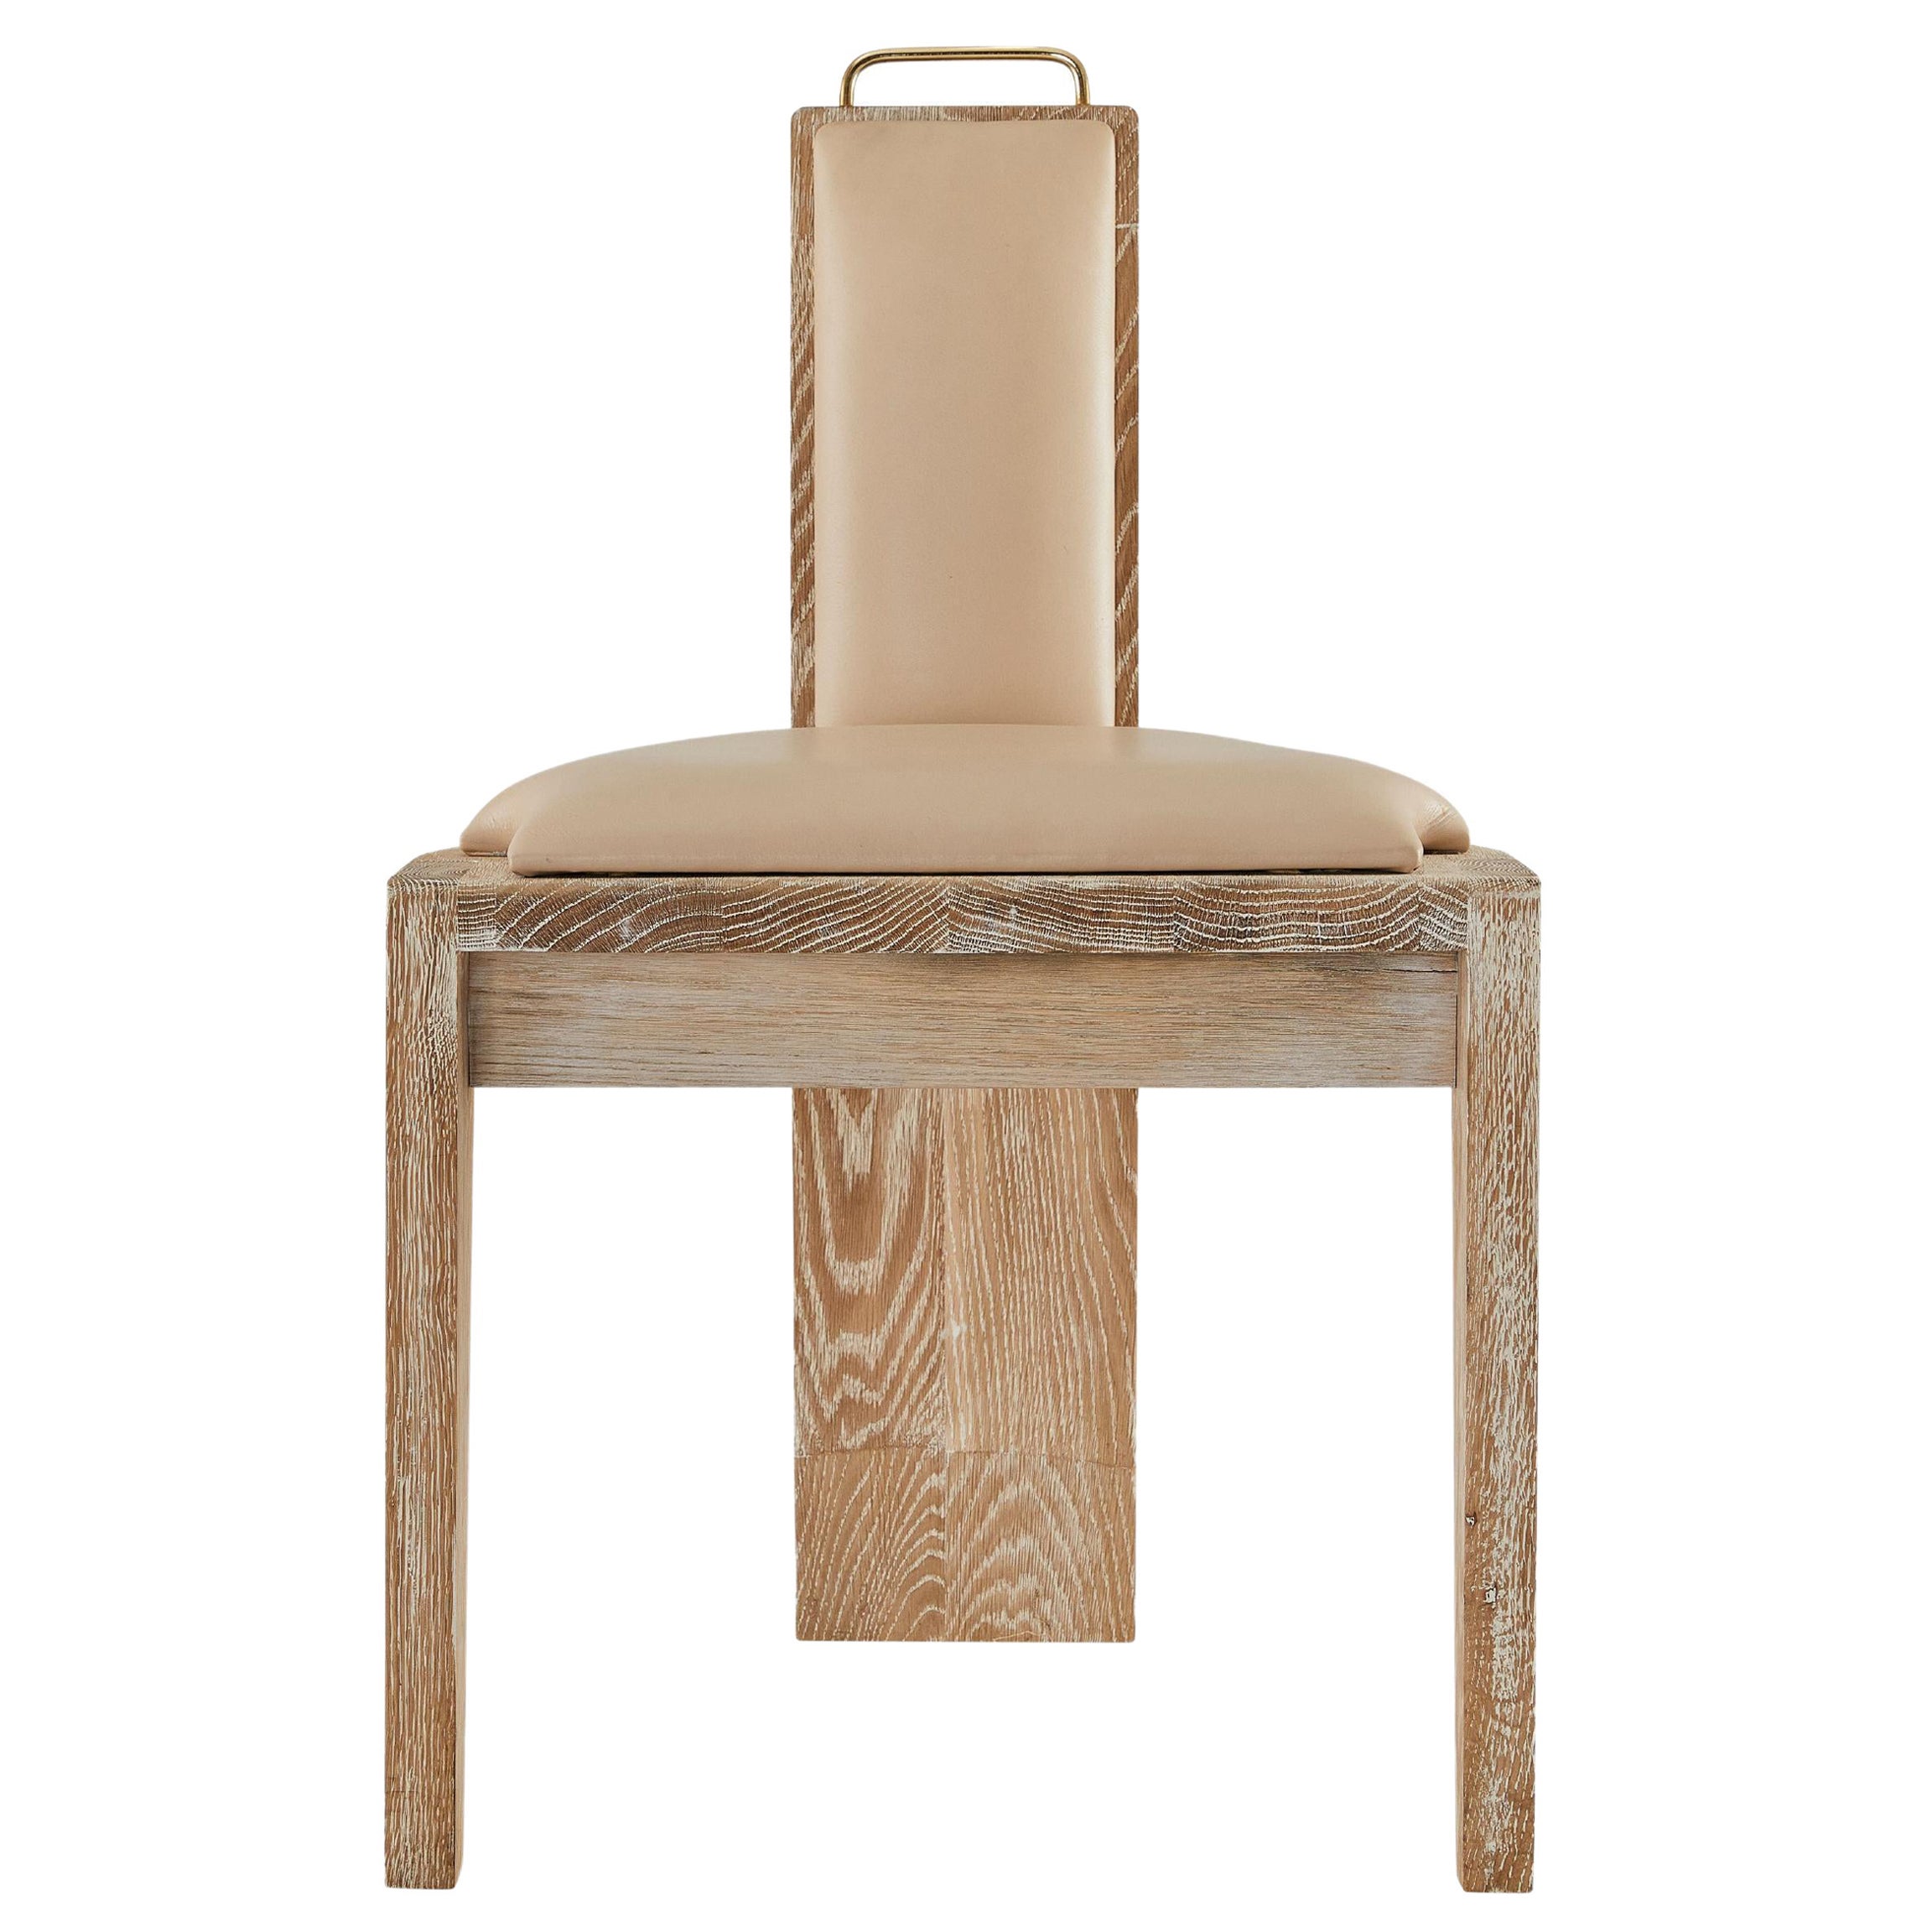 Olifant Dining Chair by Egg Designs